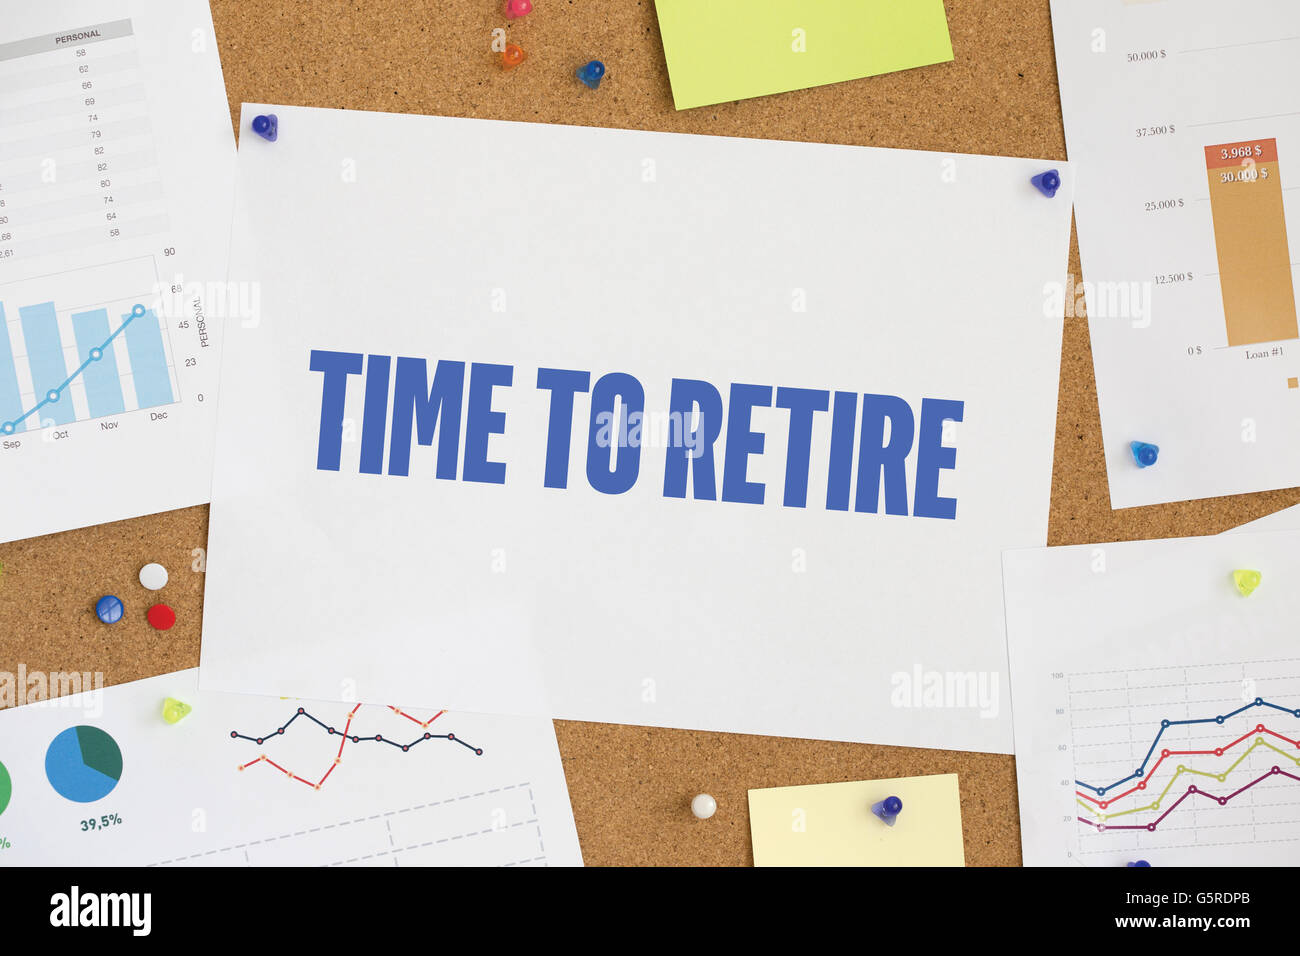 CHART BUSINESS GRAPH RESULT COMPANY TIME TO RETIRE CONCEPT Stock Photo